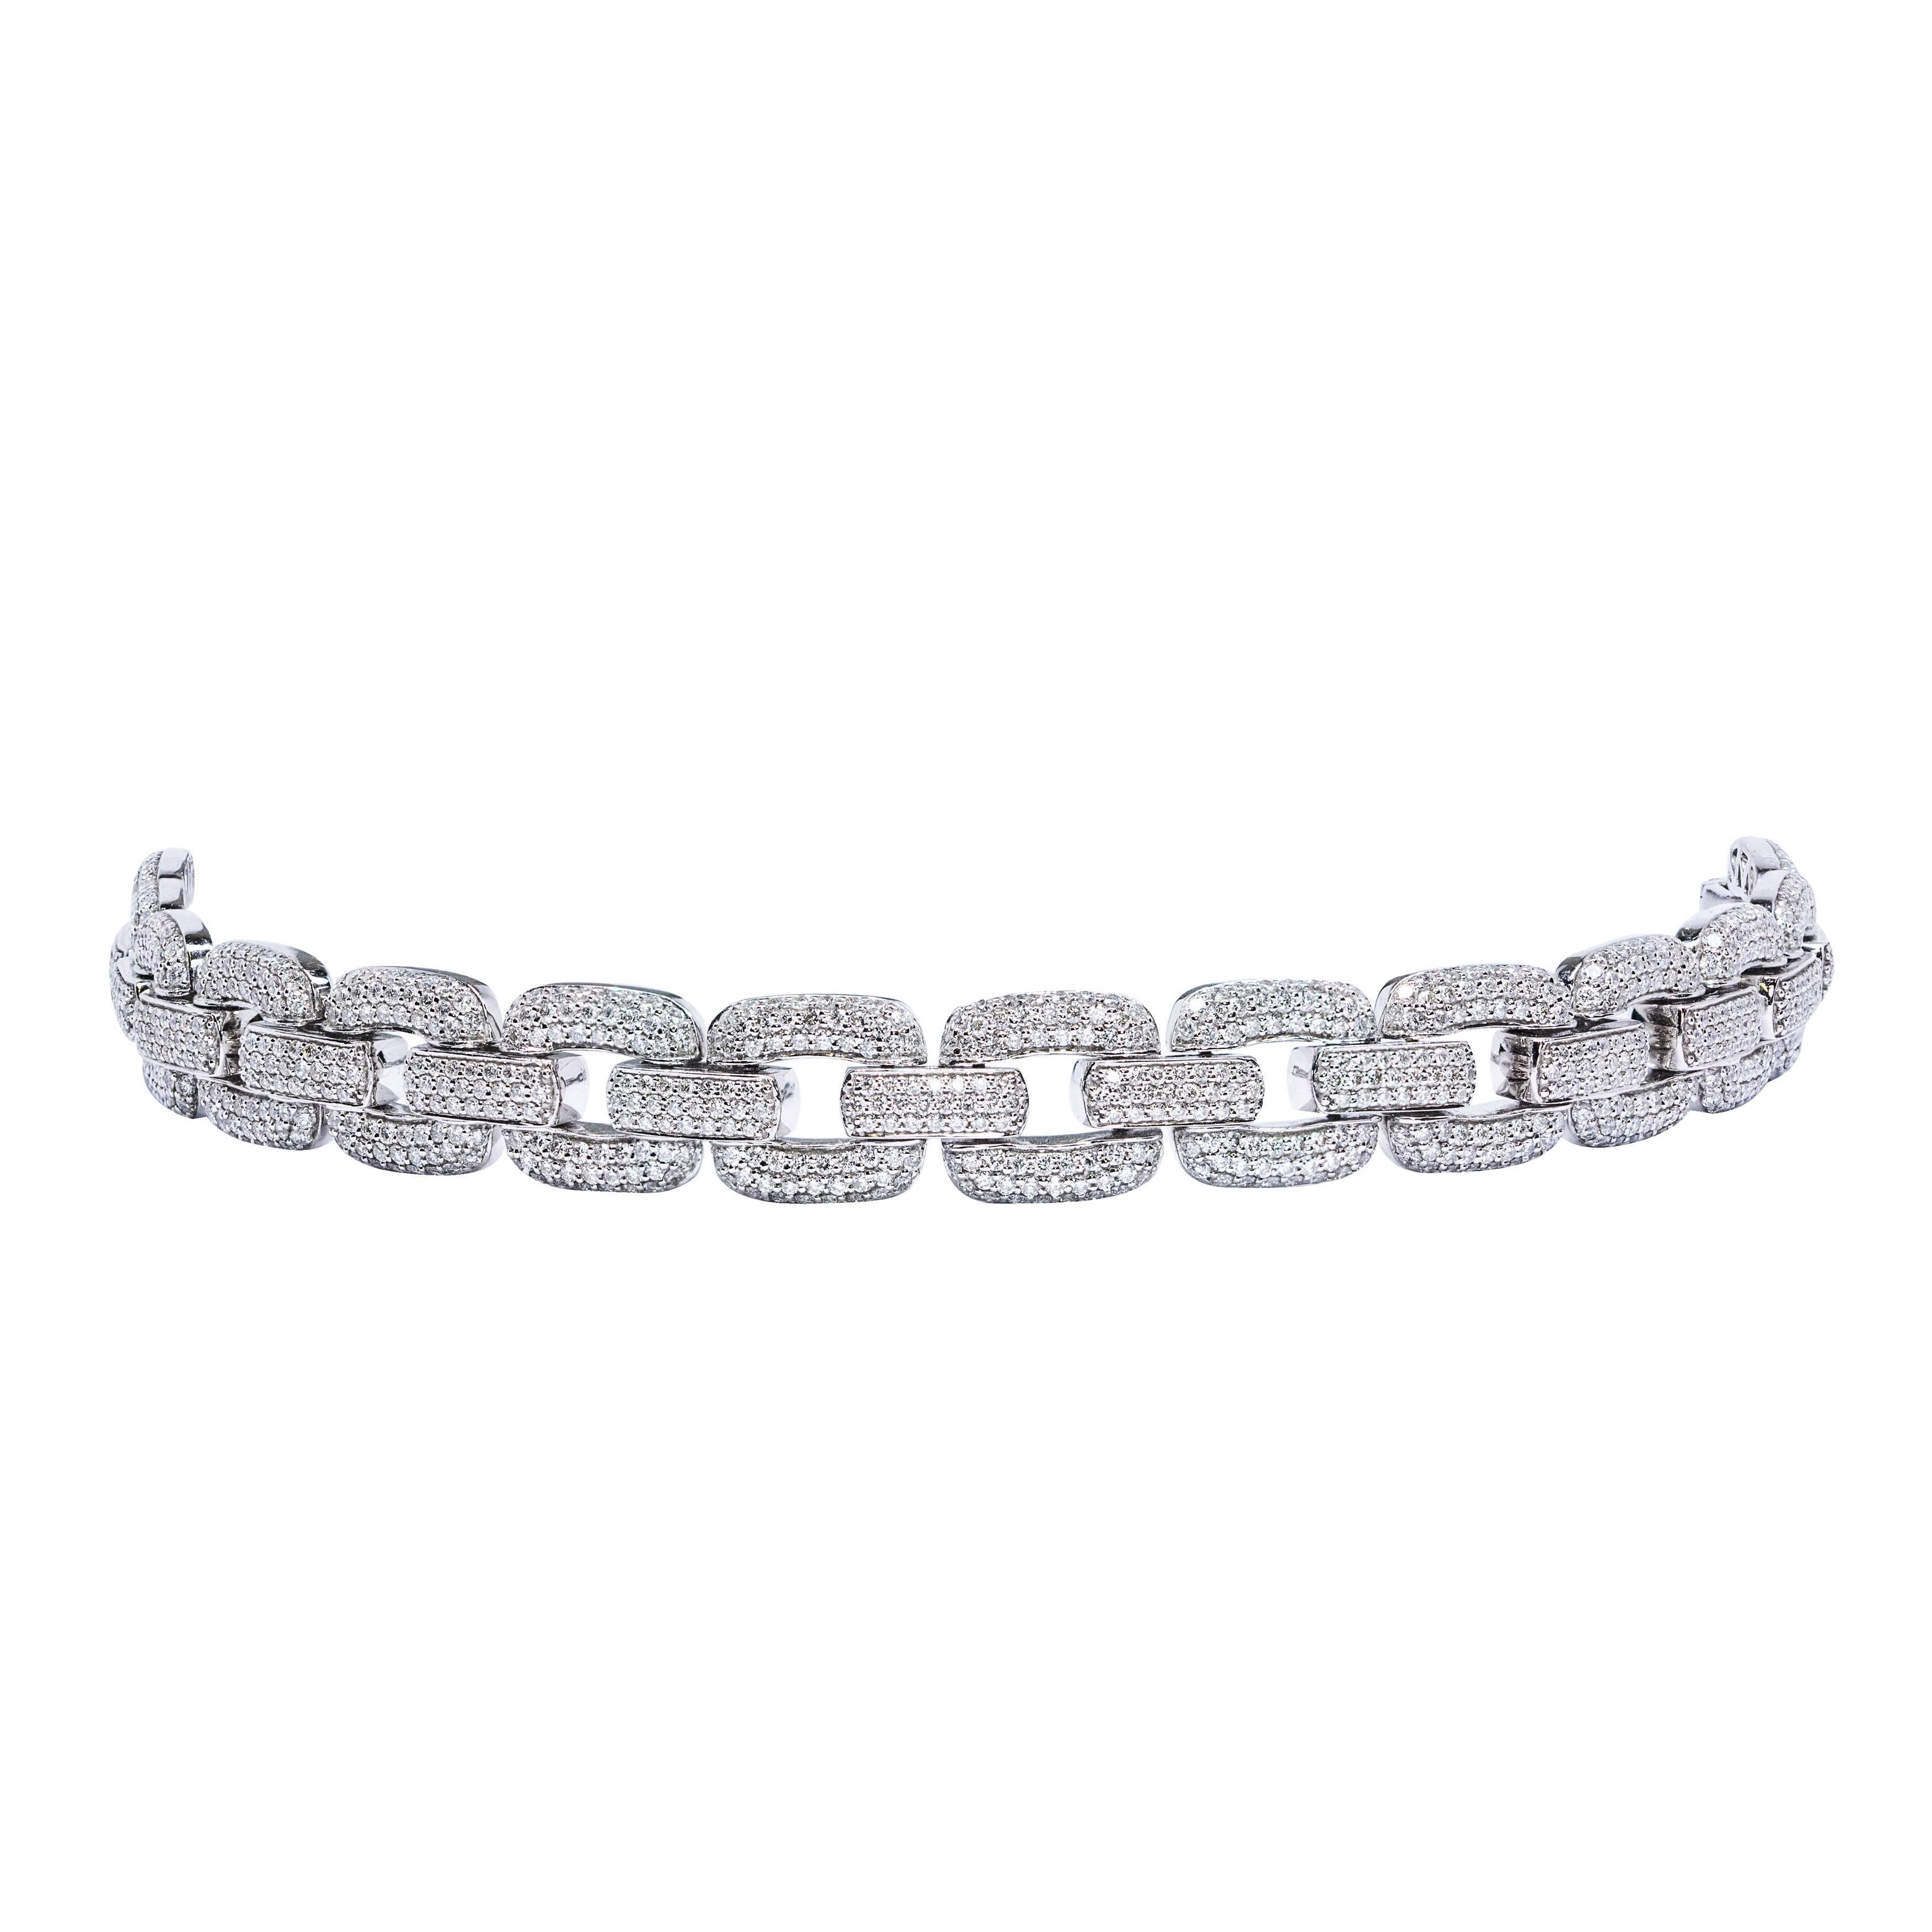 A stunning link bracelet with micro-pave set round brilliant cut diamonds of 6.55 carats total. The diamonds are approximately F color and VS clarity. Set in 18K white gold, this bracelet measures about 7 inches in length and 0.45 inches in width. A